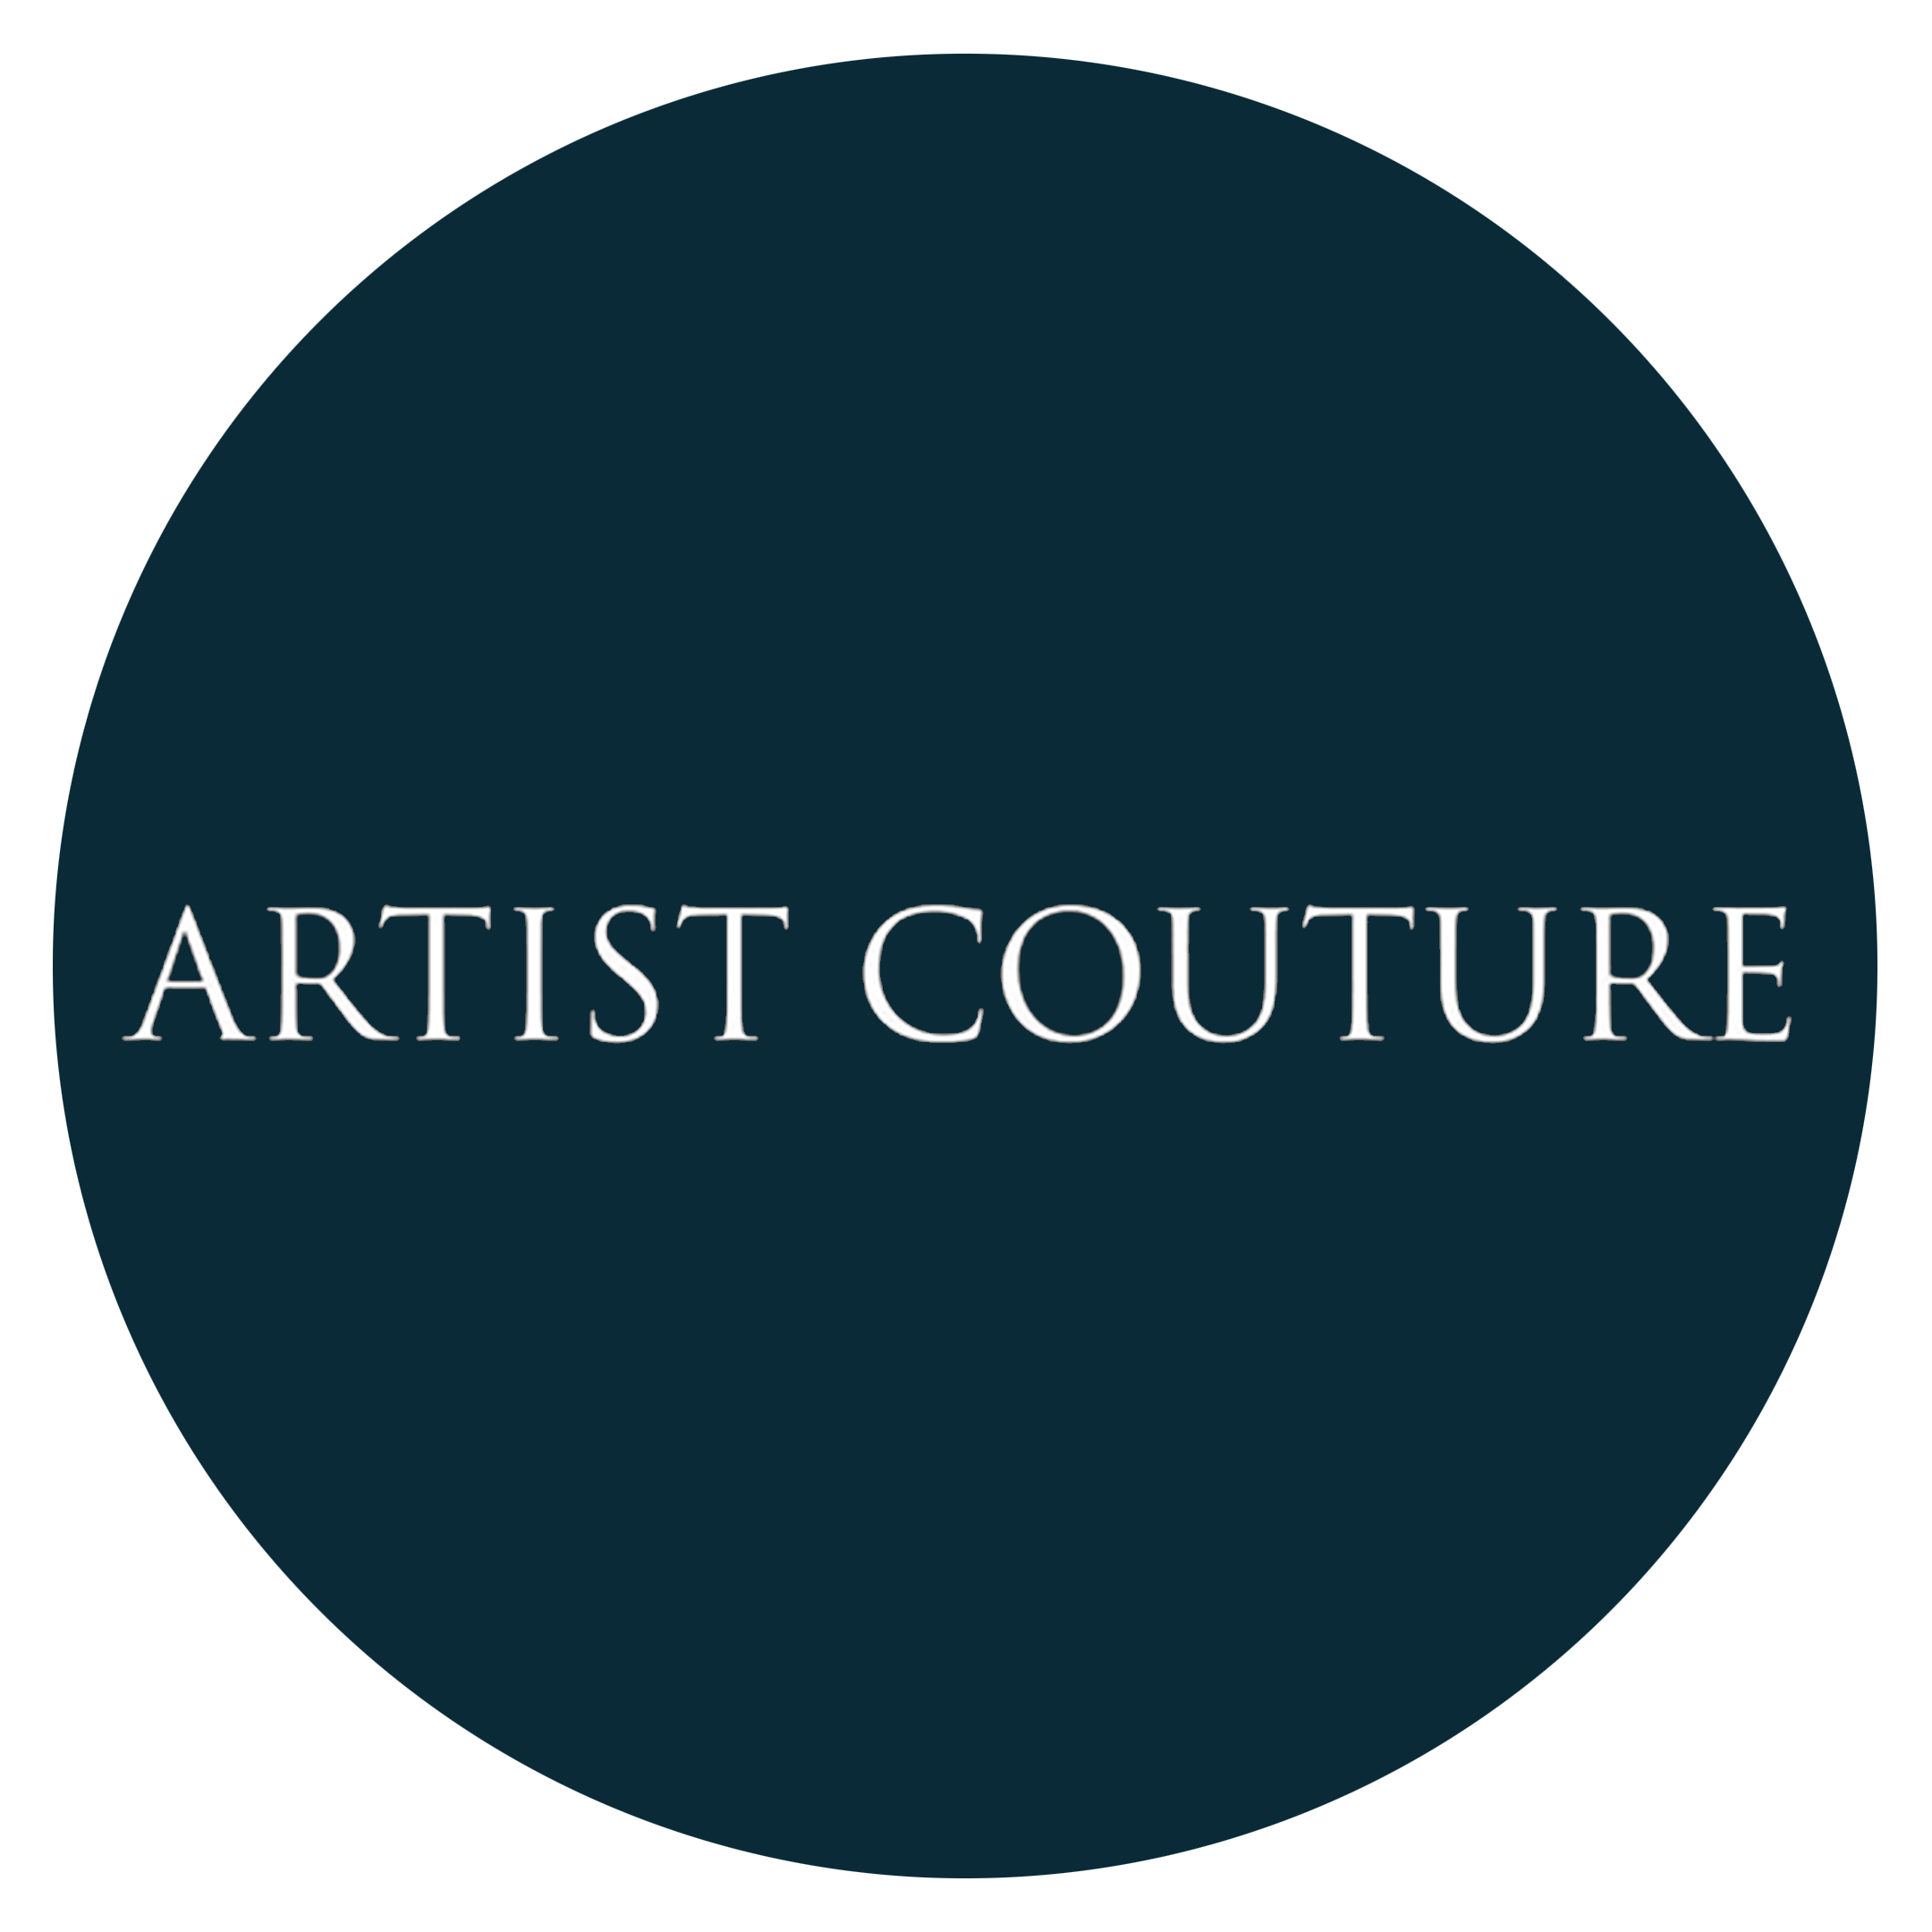 Artist Couture